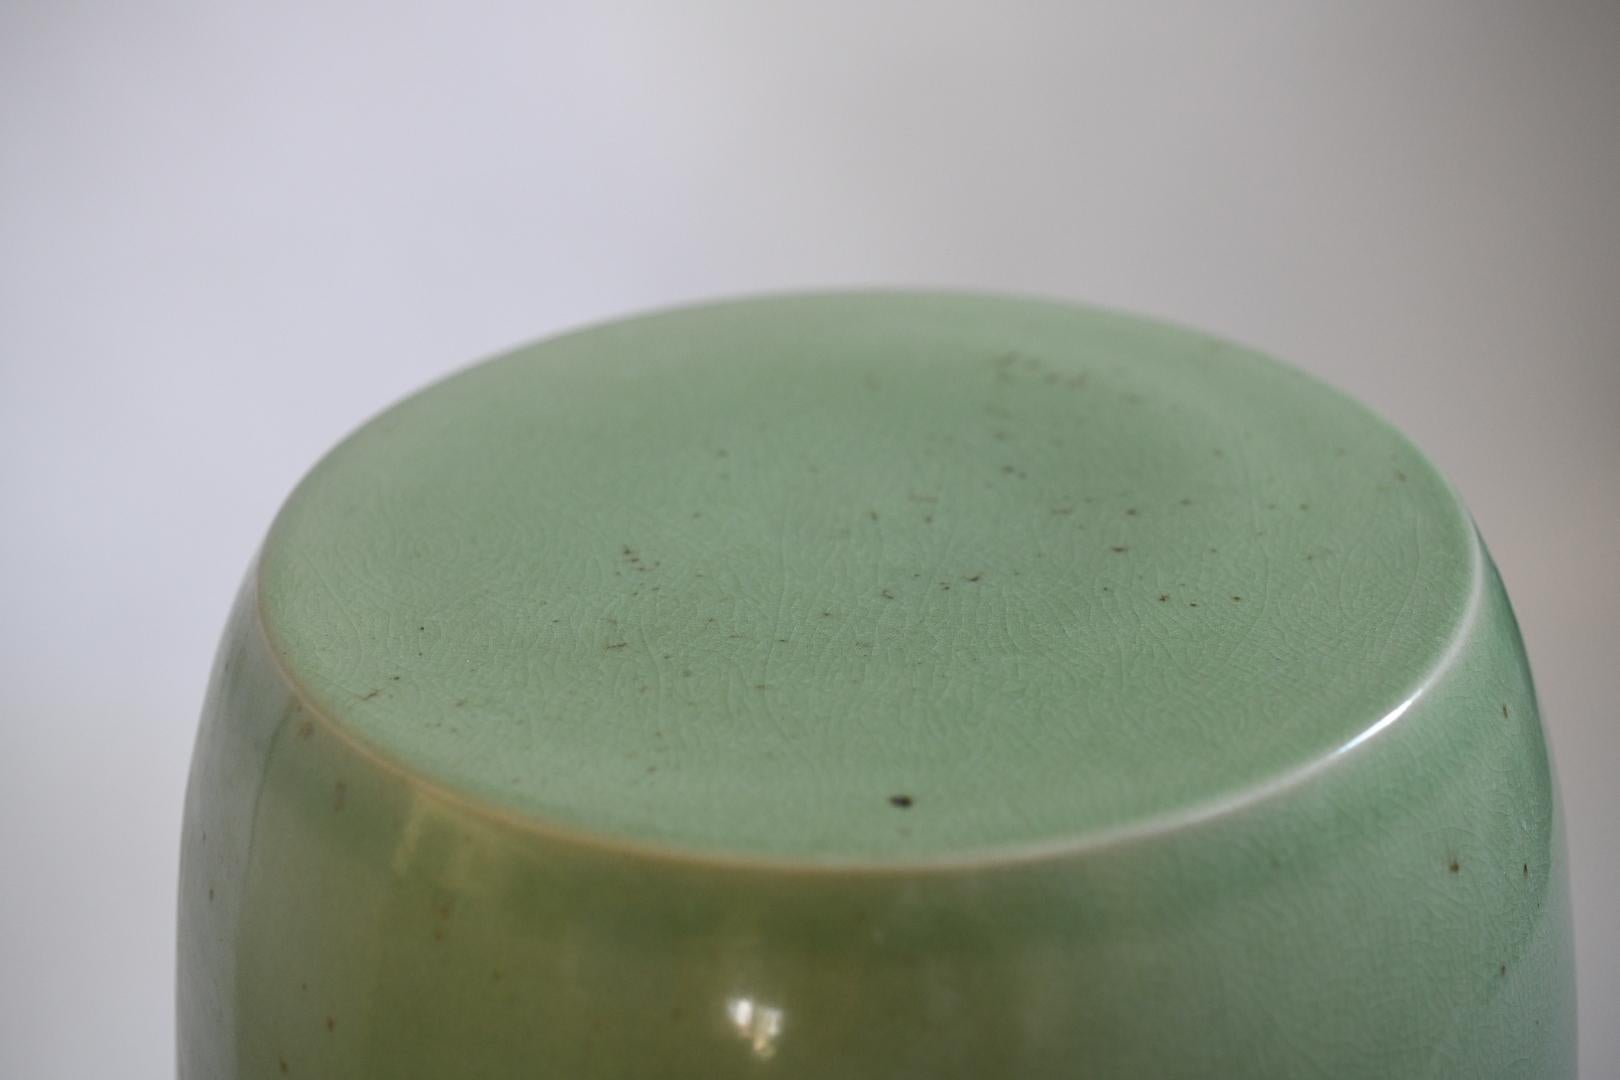 Celadon Glazed Porcelain Stools In Excellent Condition For Sale In New York, NY